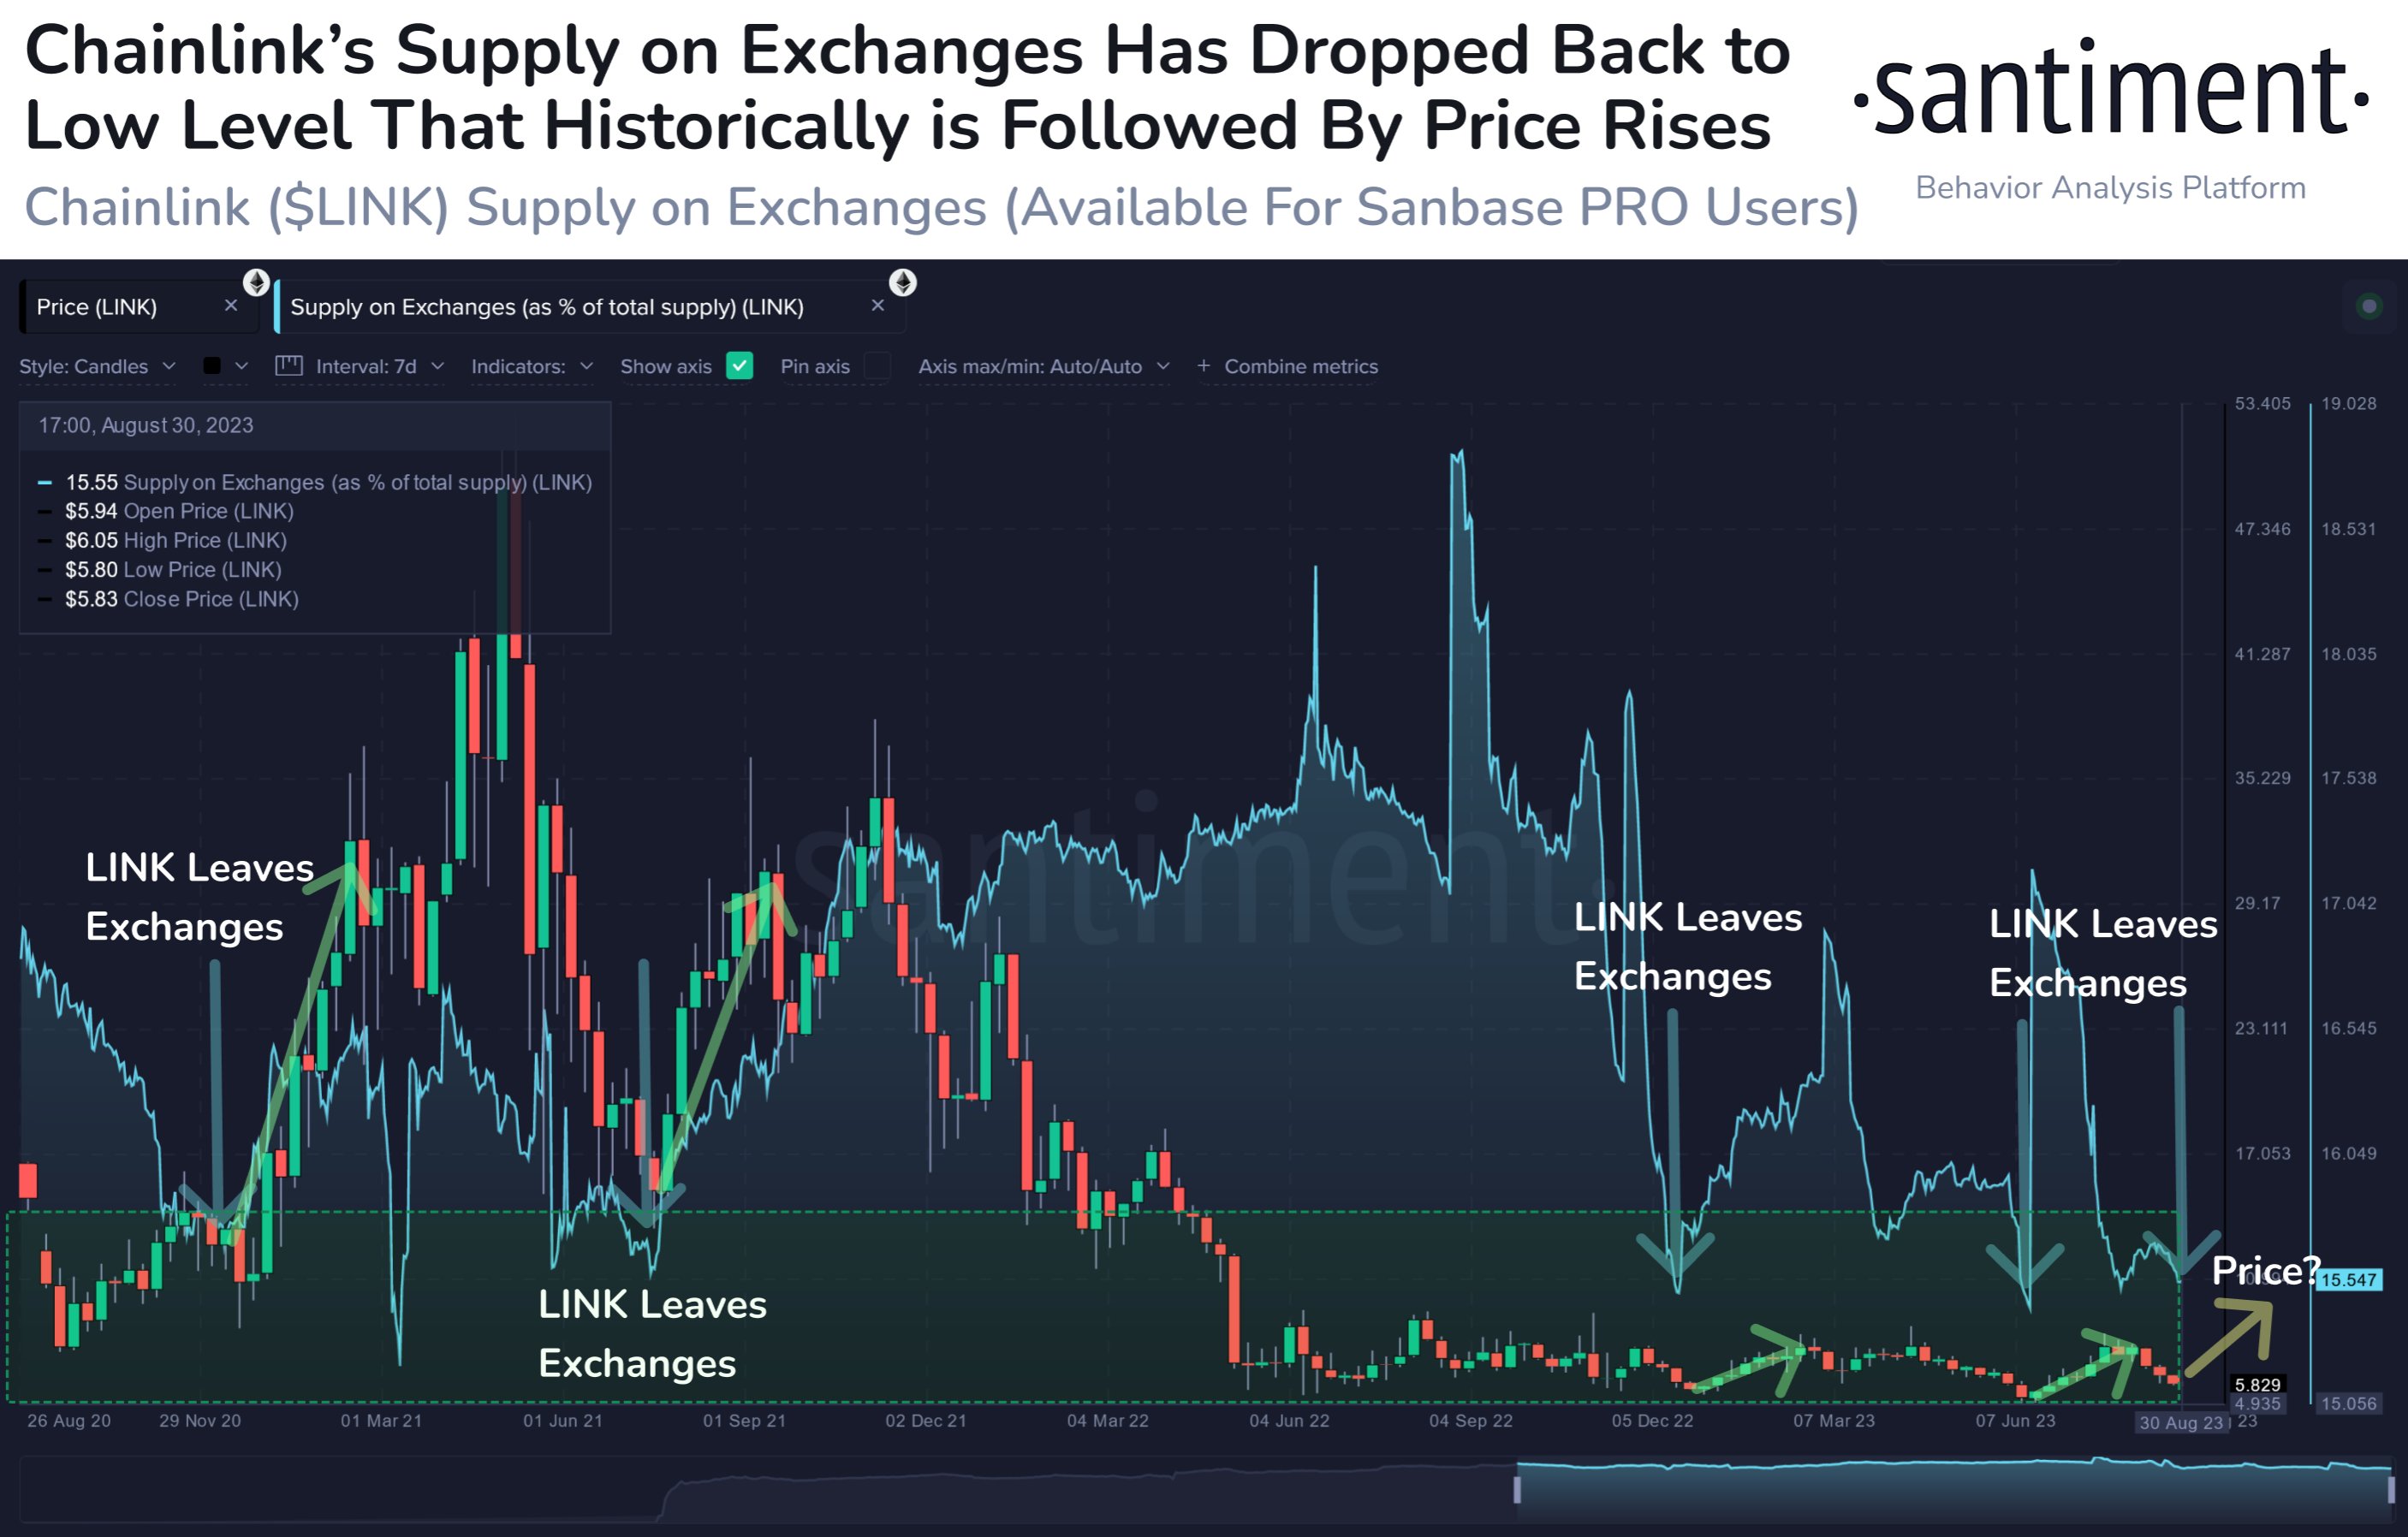 Chainlink supply on exchanges as seen on Santiment